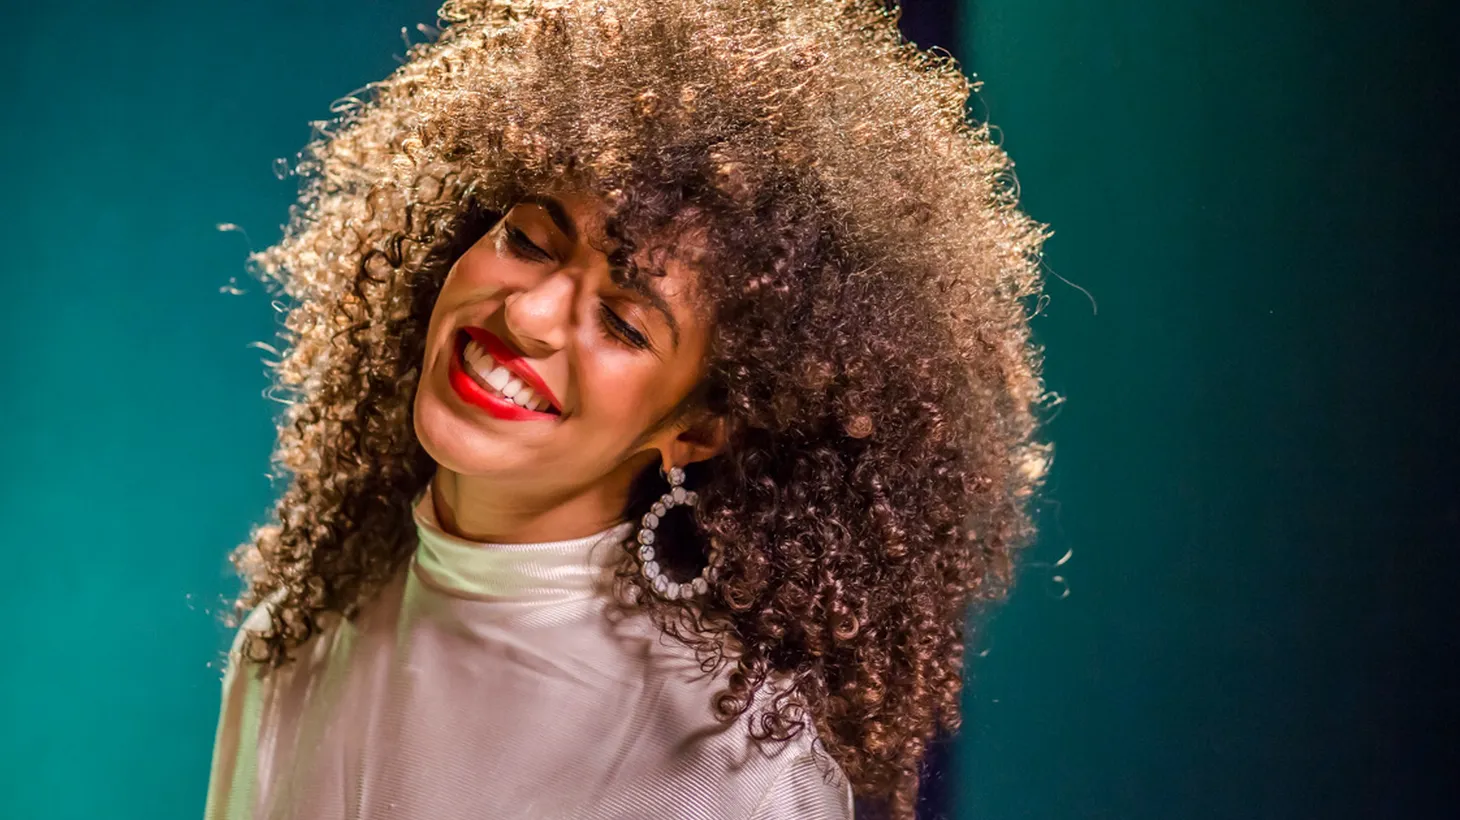 Gavin Turek delivers dancefloor-ready disco soul and has been compared to Beyonce for her incredible on-stage charisma.